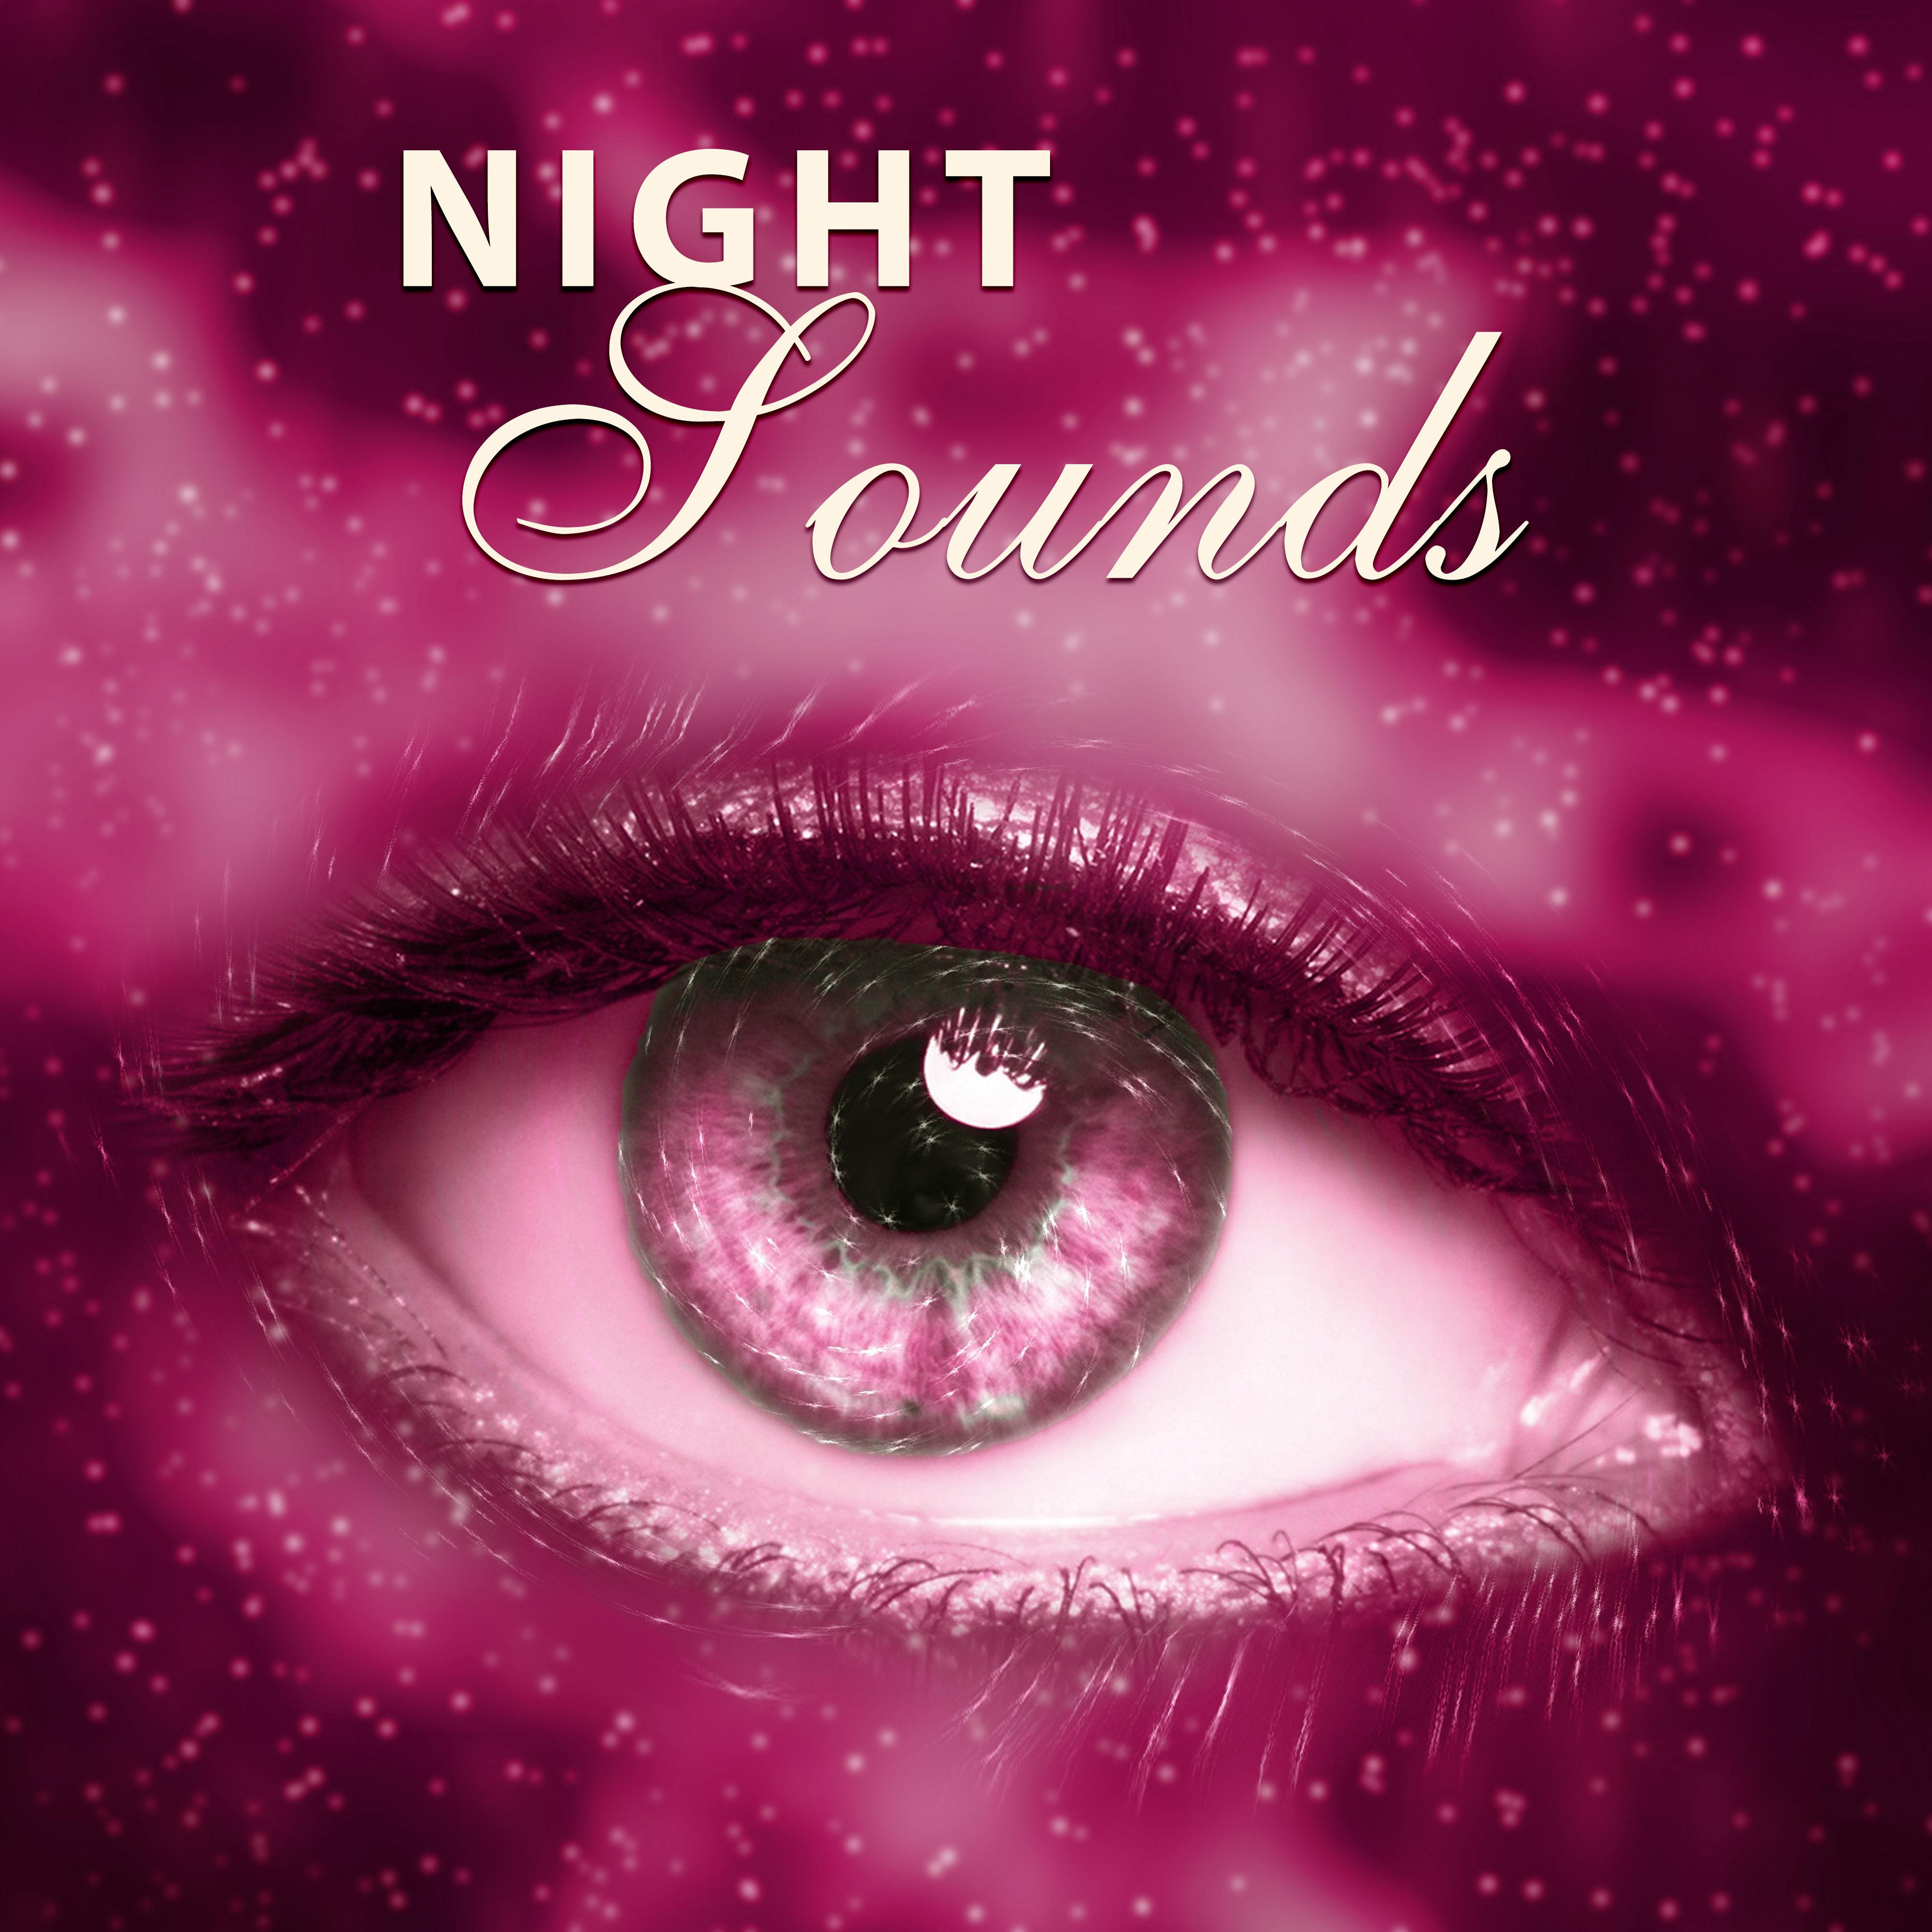 Night Sounds  New Age Music, Ambient Sleep, Dreaming All Night, Calmness, Night Sky